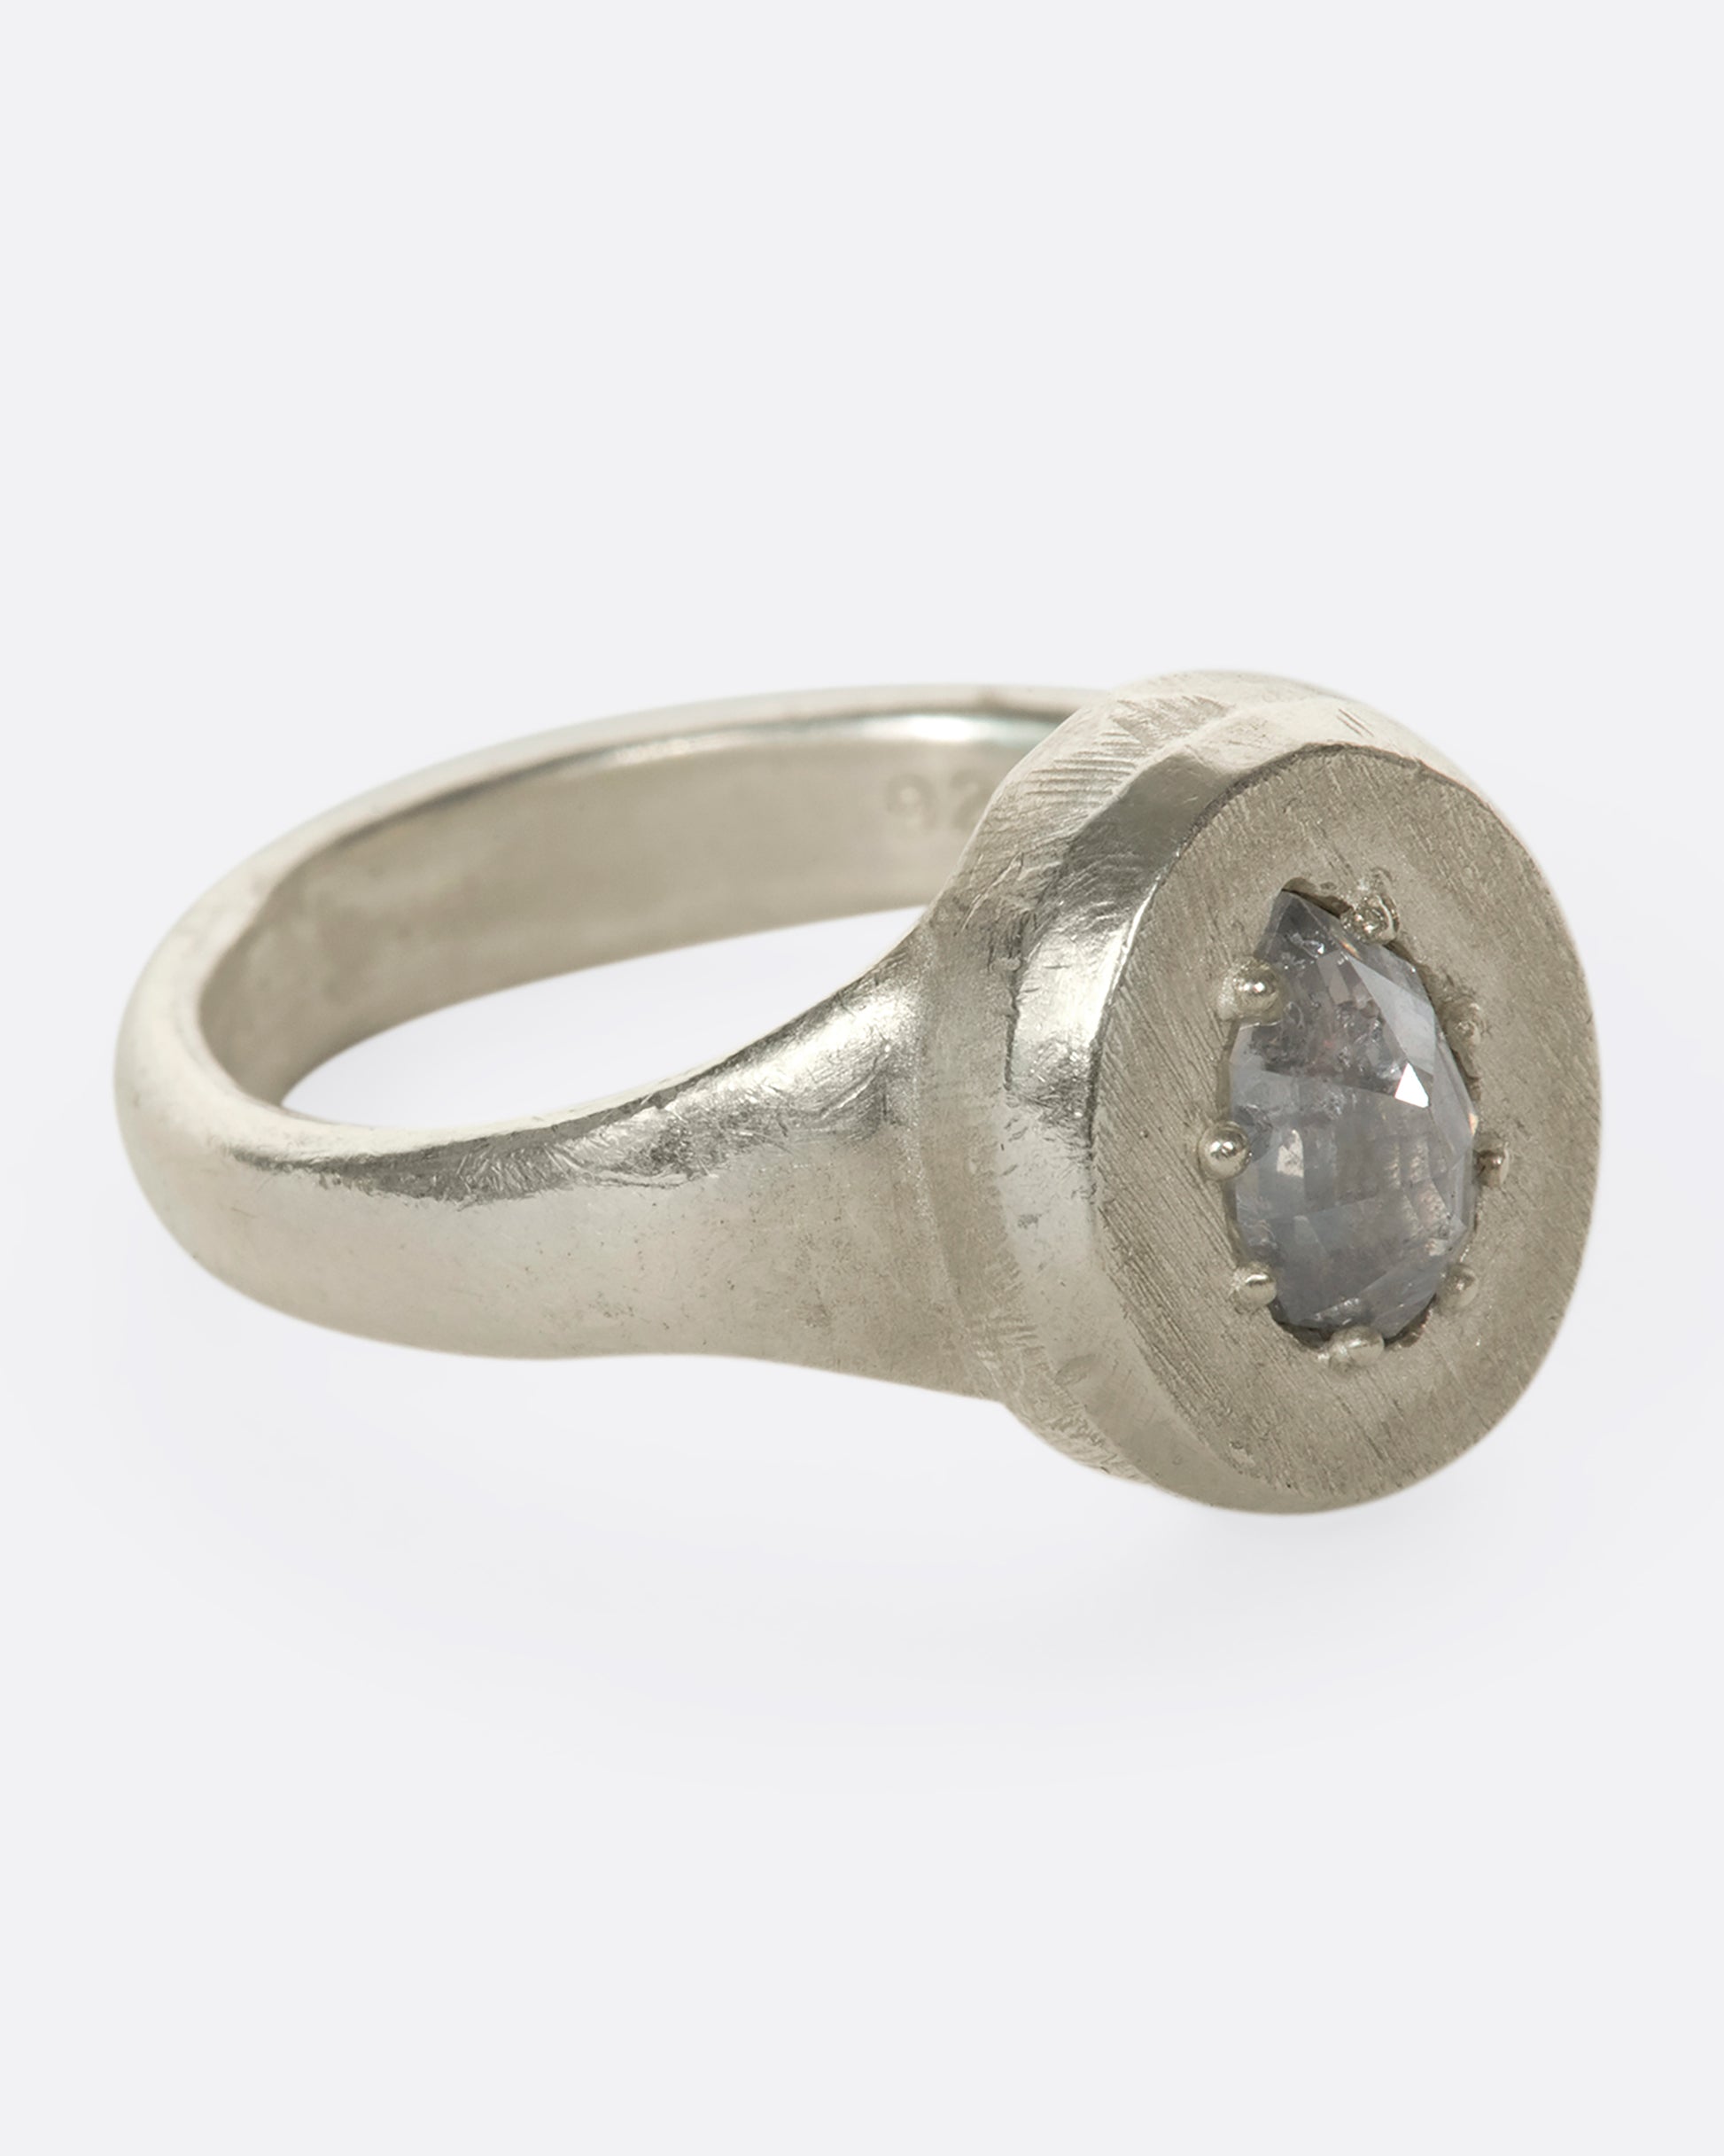 A sterling silver signet ring with a pear-shaped salt and pepper diamond secured with tiny prongs